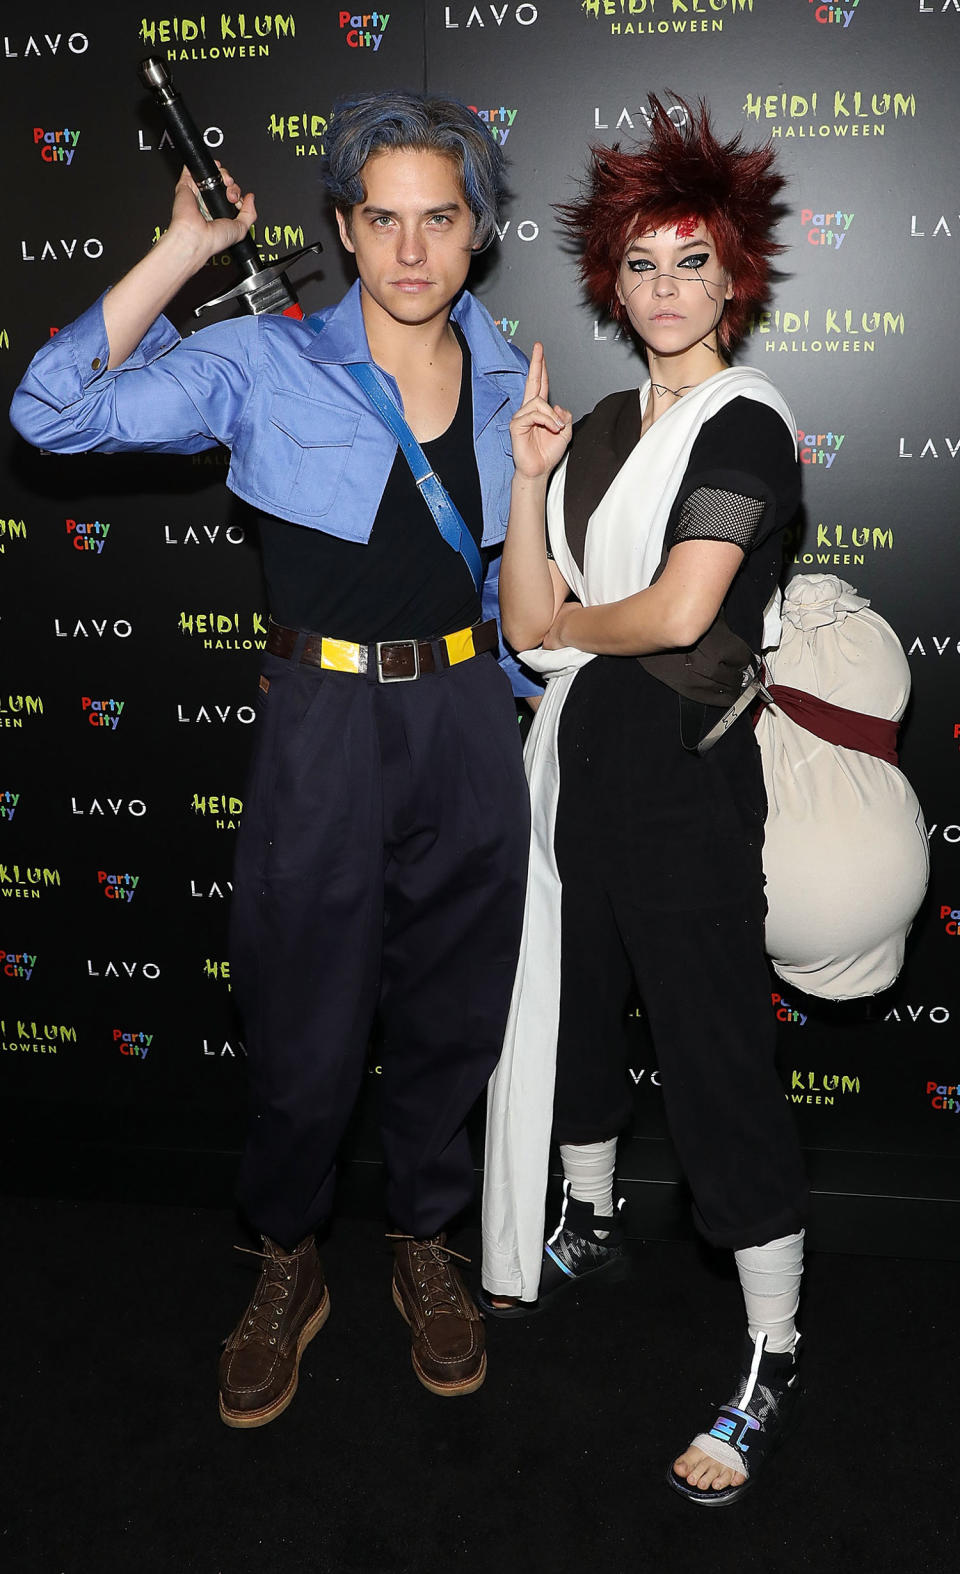 Famous Couples Costumes (Taylor Hill / FilmMagic / Getty Images)